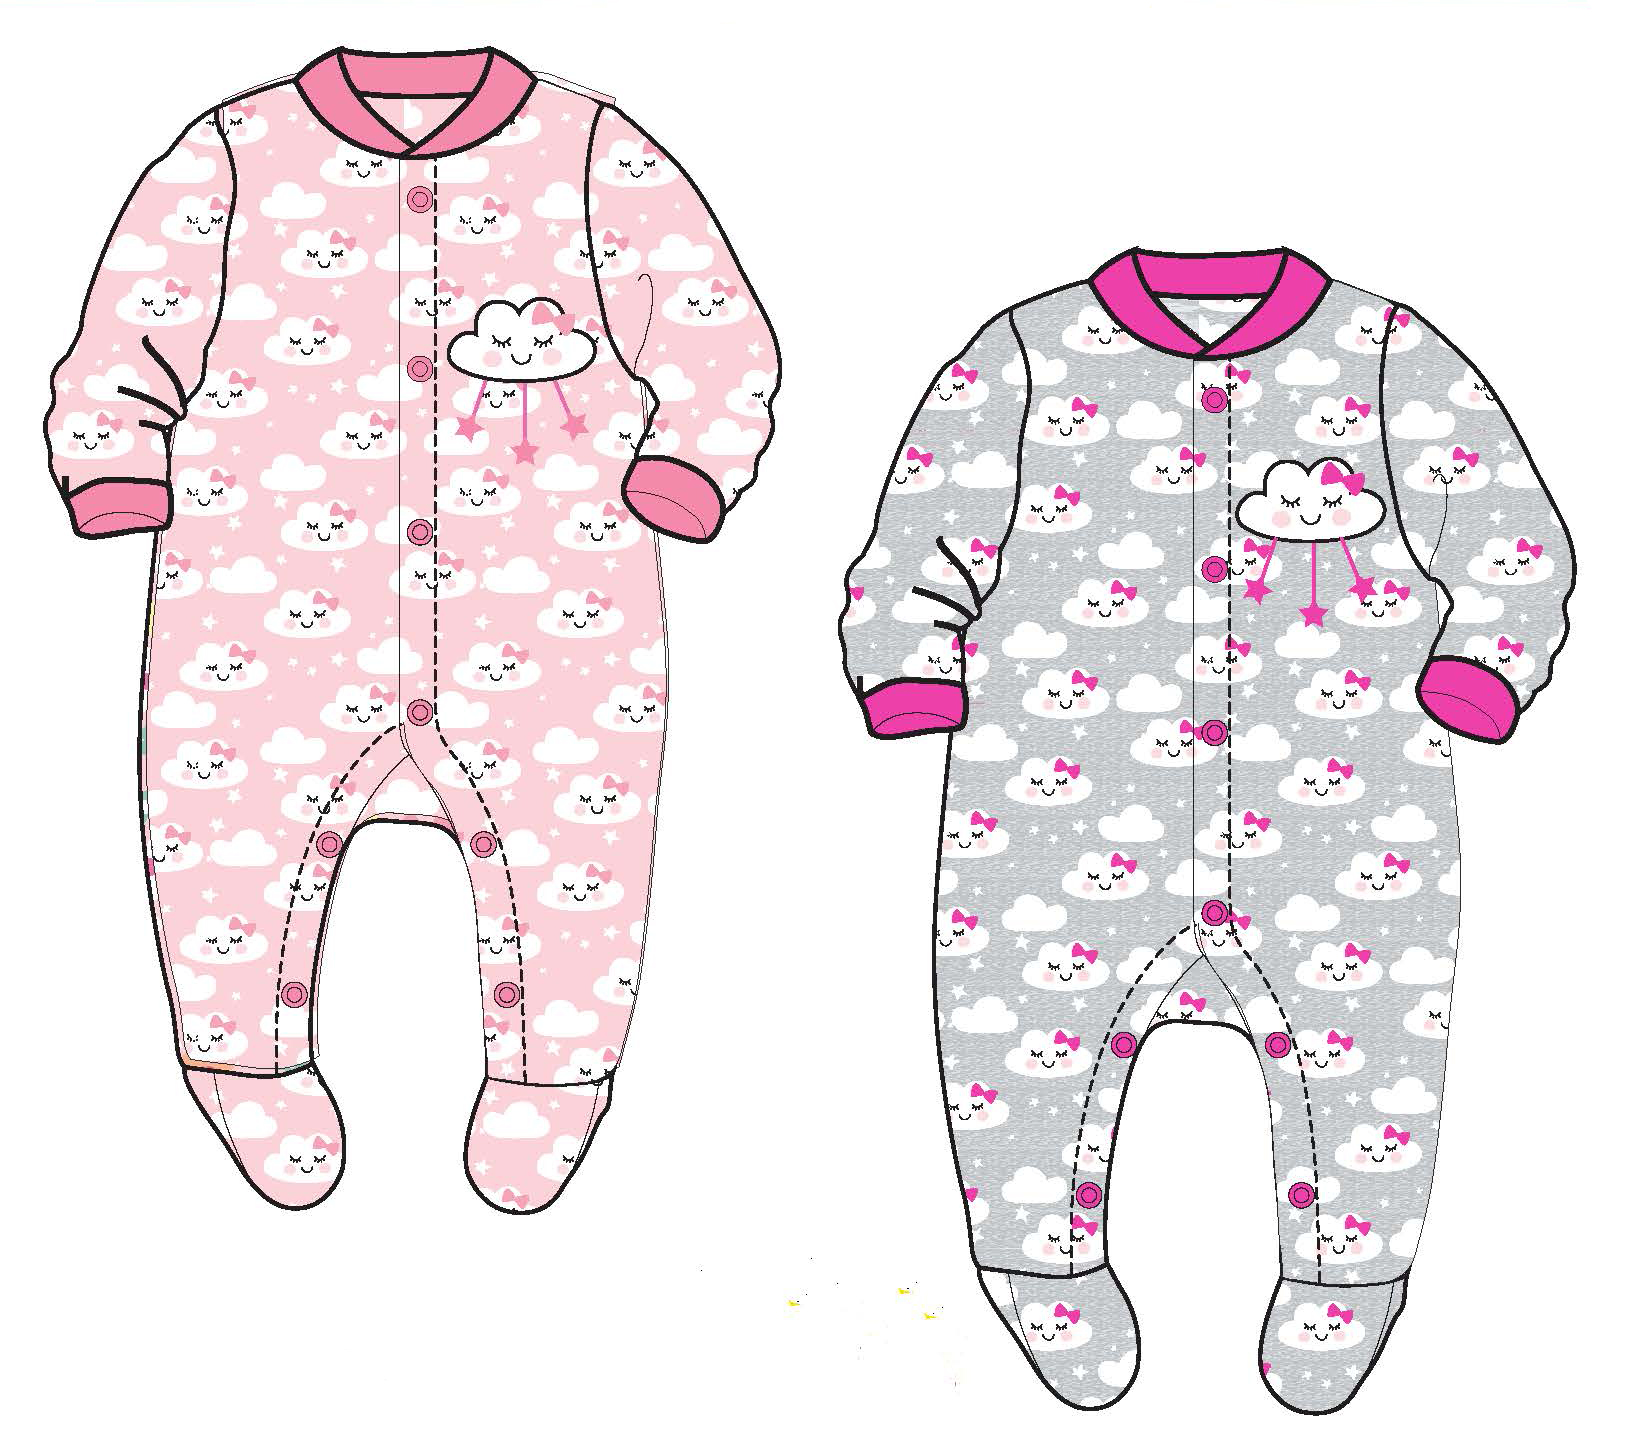 Baby Girl's Knit One-Piece Footed PAJAMAS w/ Bedtime Cloud Print - Sizes 0/3M-9M